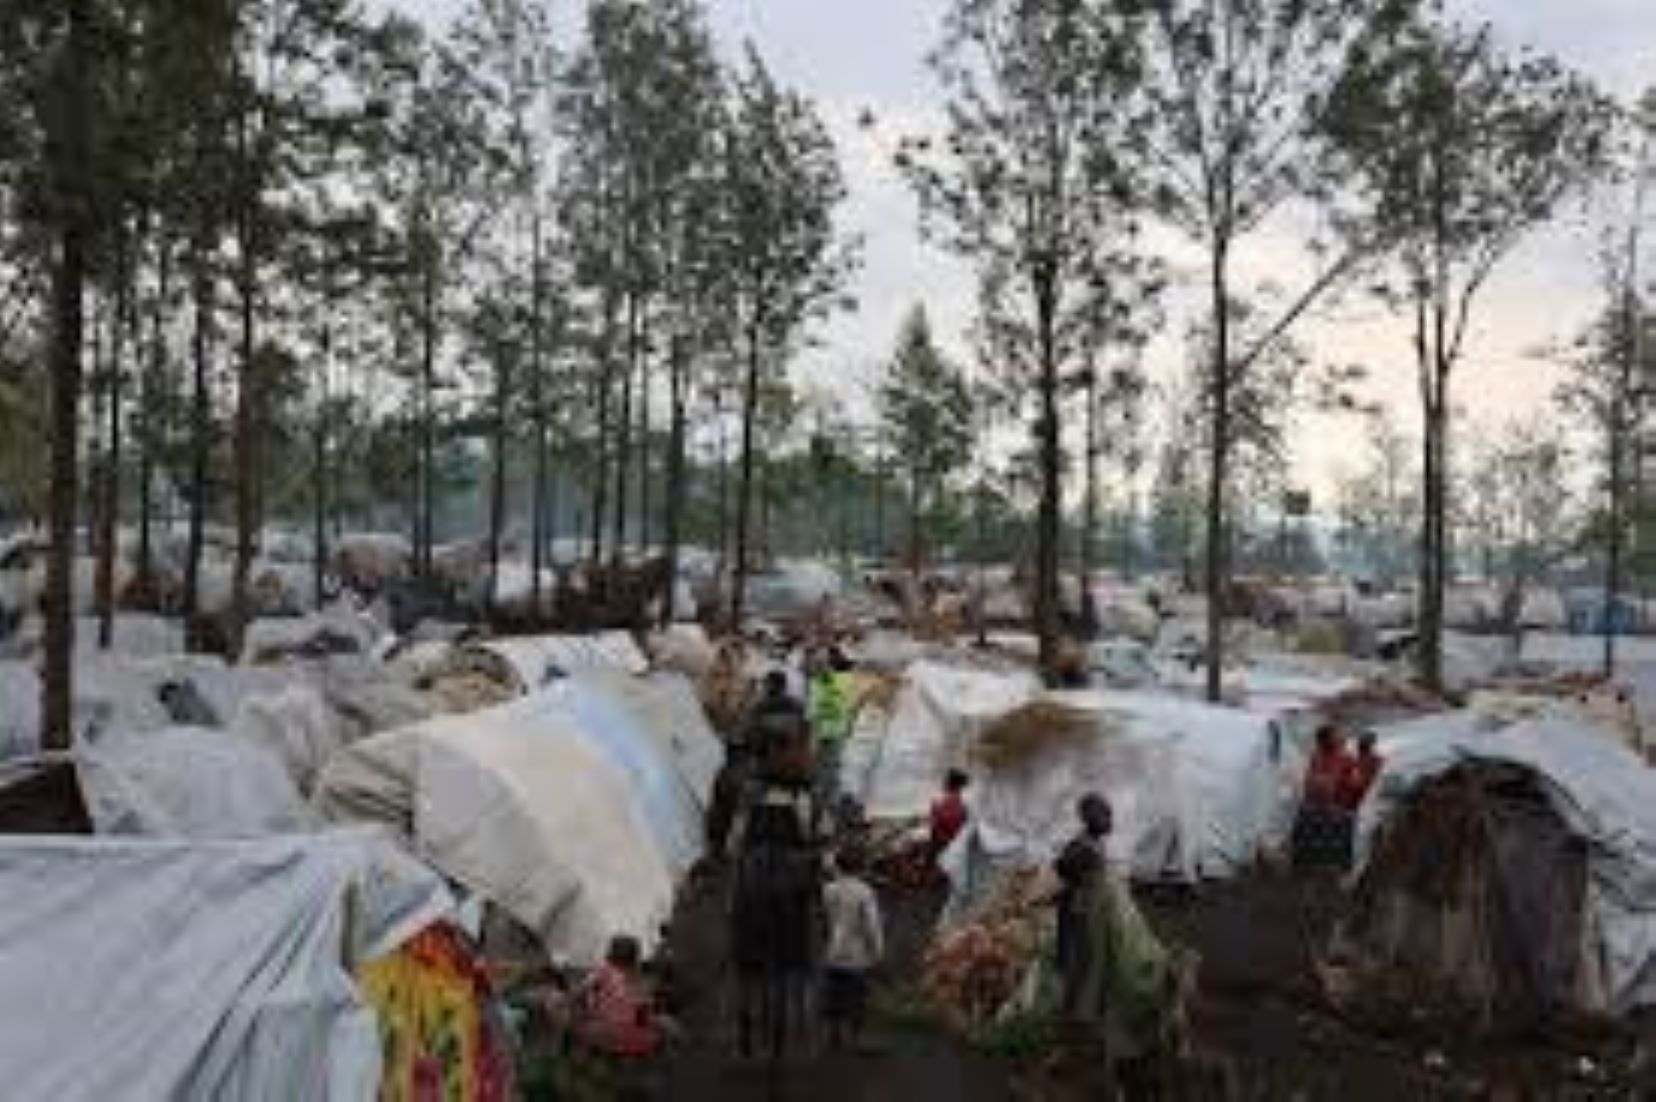 UN Humanitarians Fear For 500,000 Displaced People In Eastern DRC